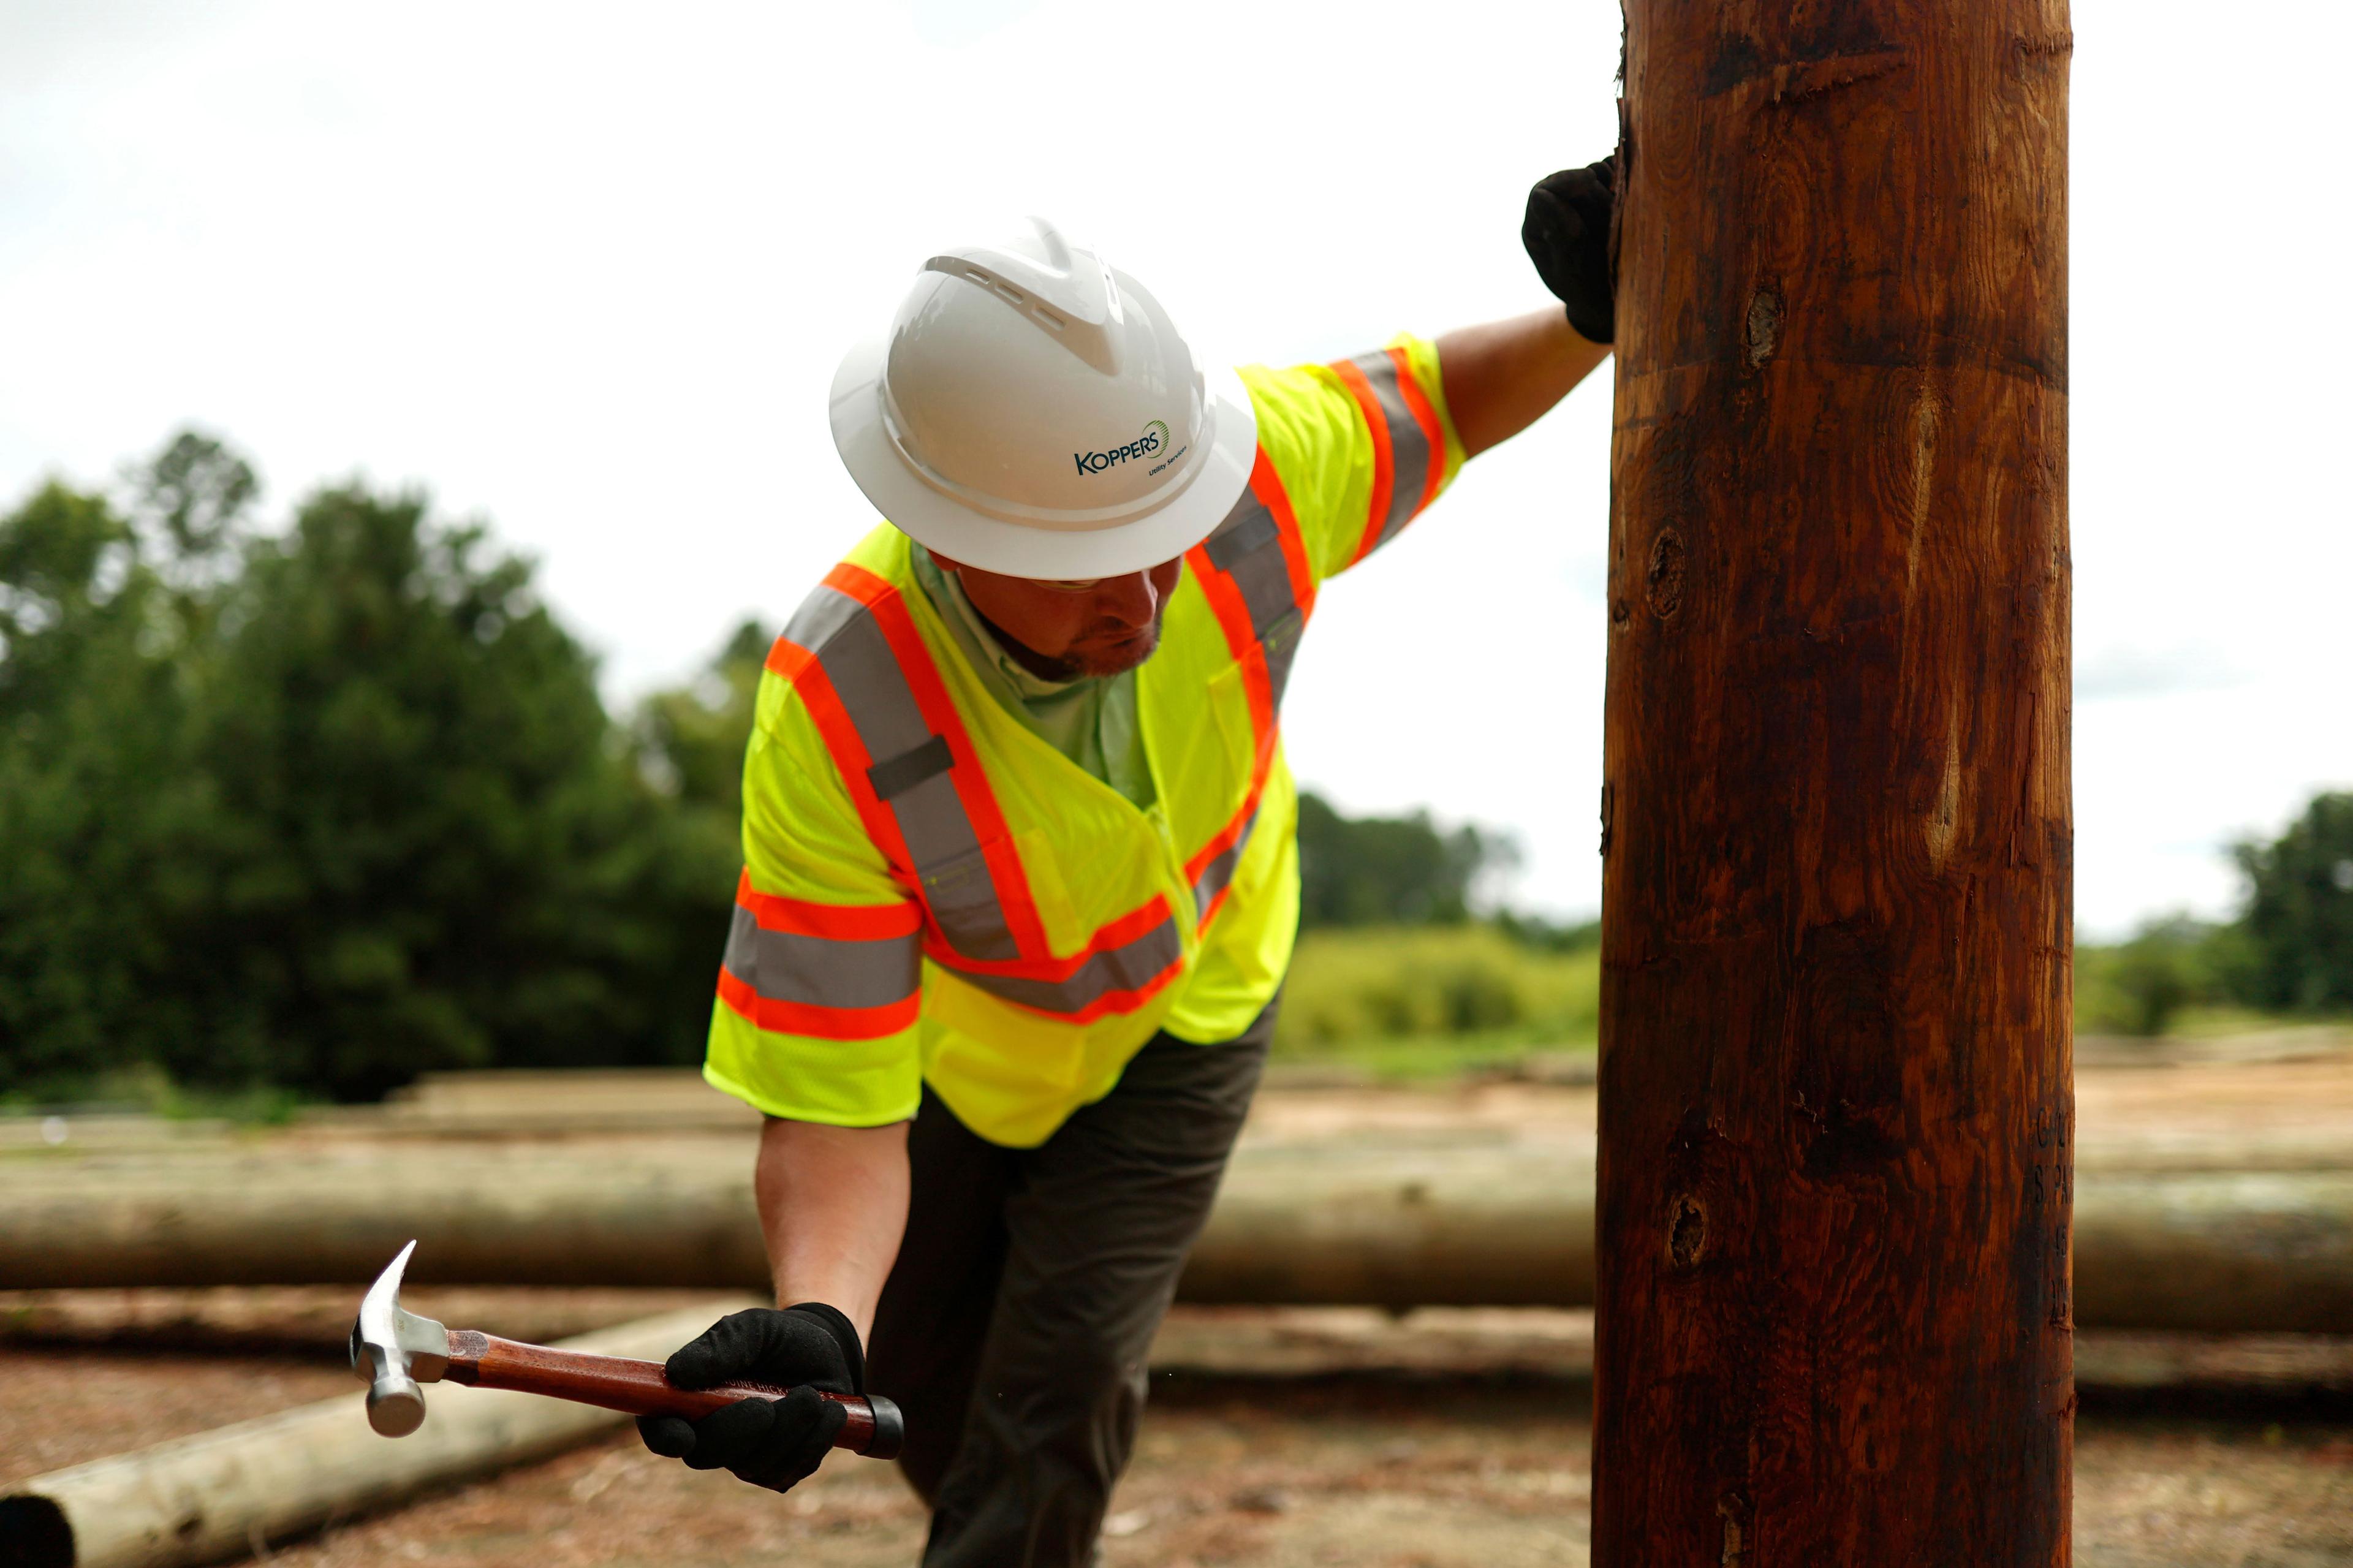 Koppers employee with a hammer holding onto a utility pole